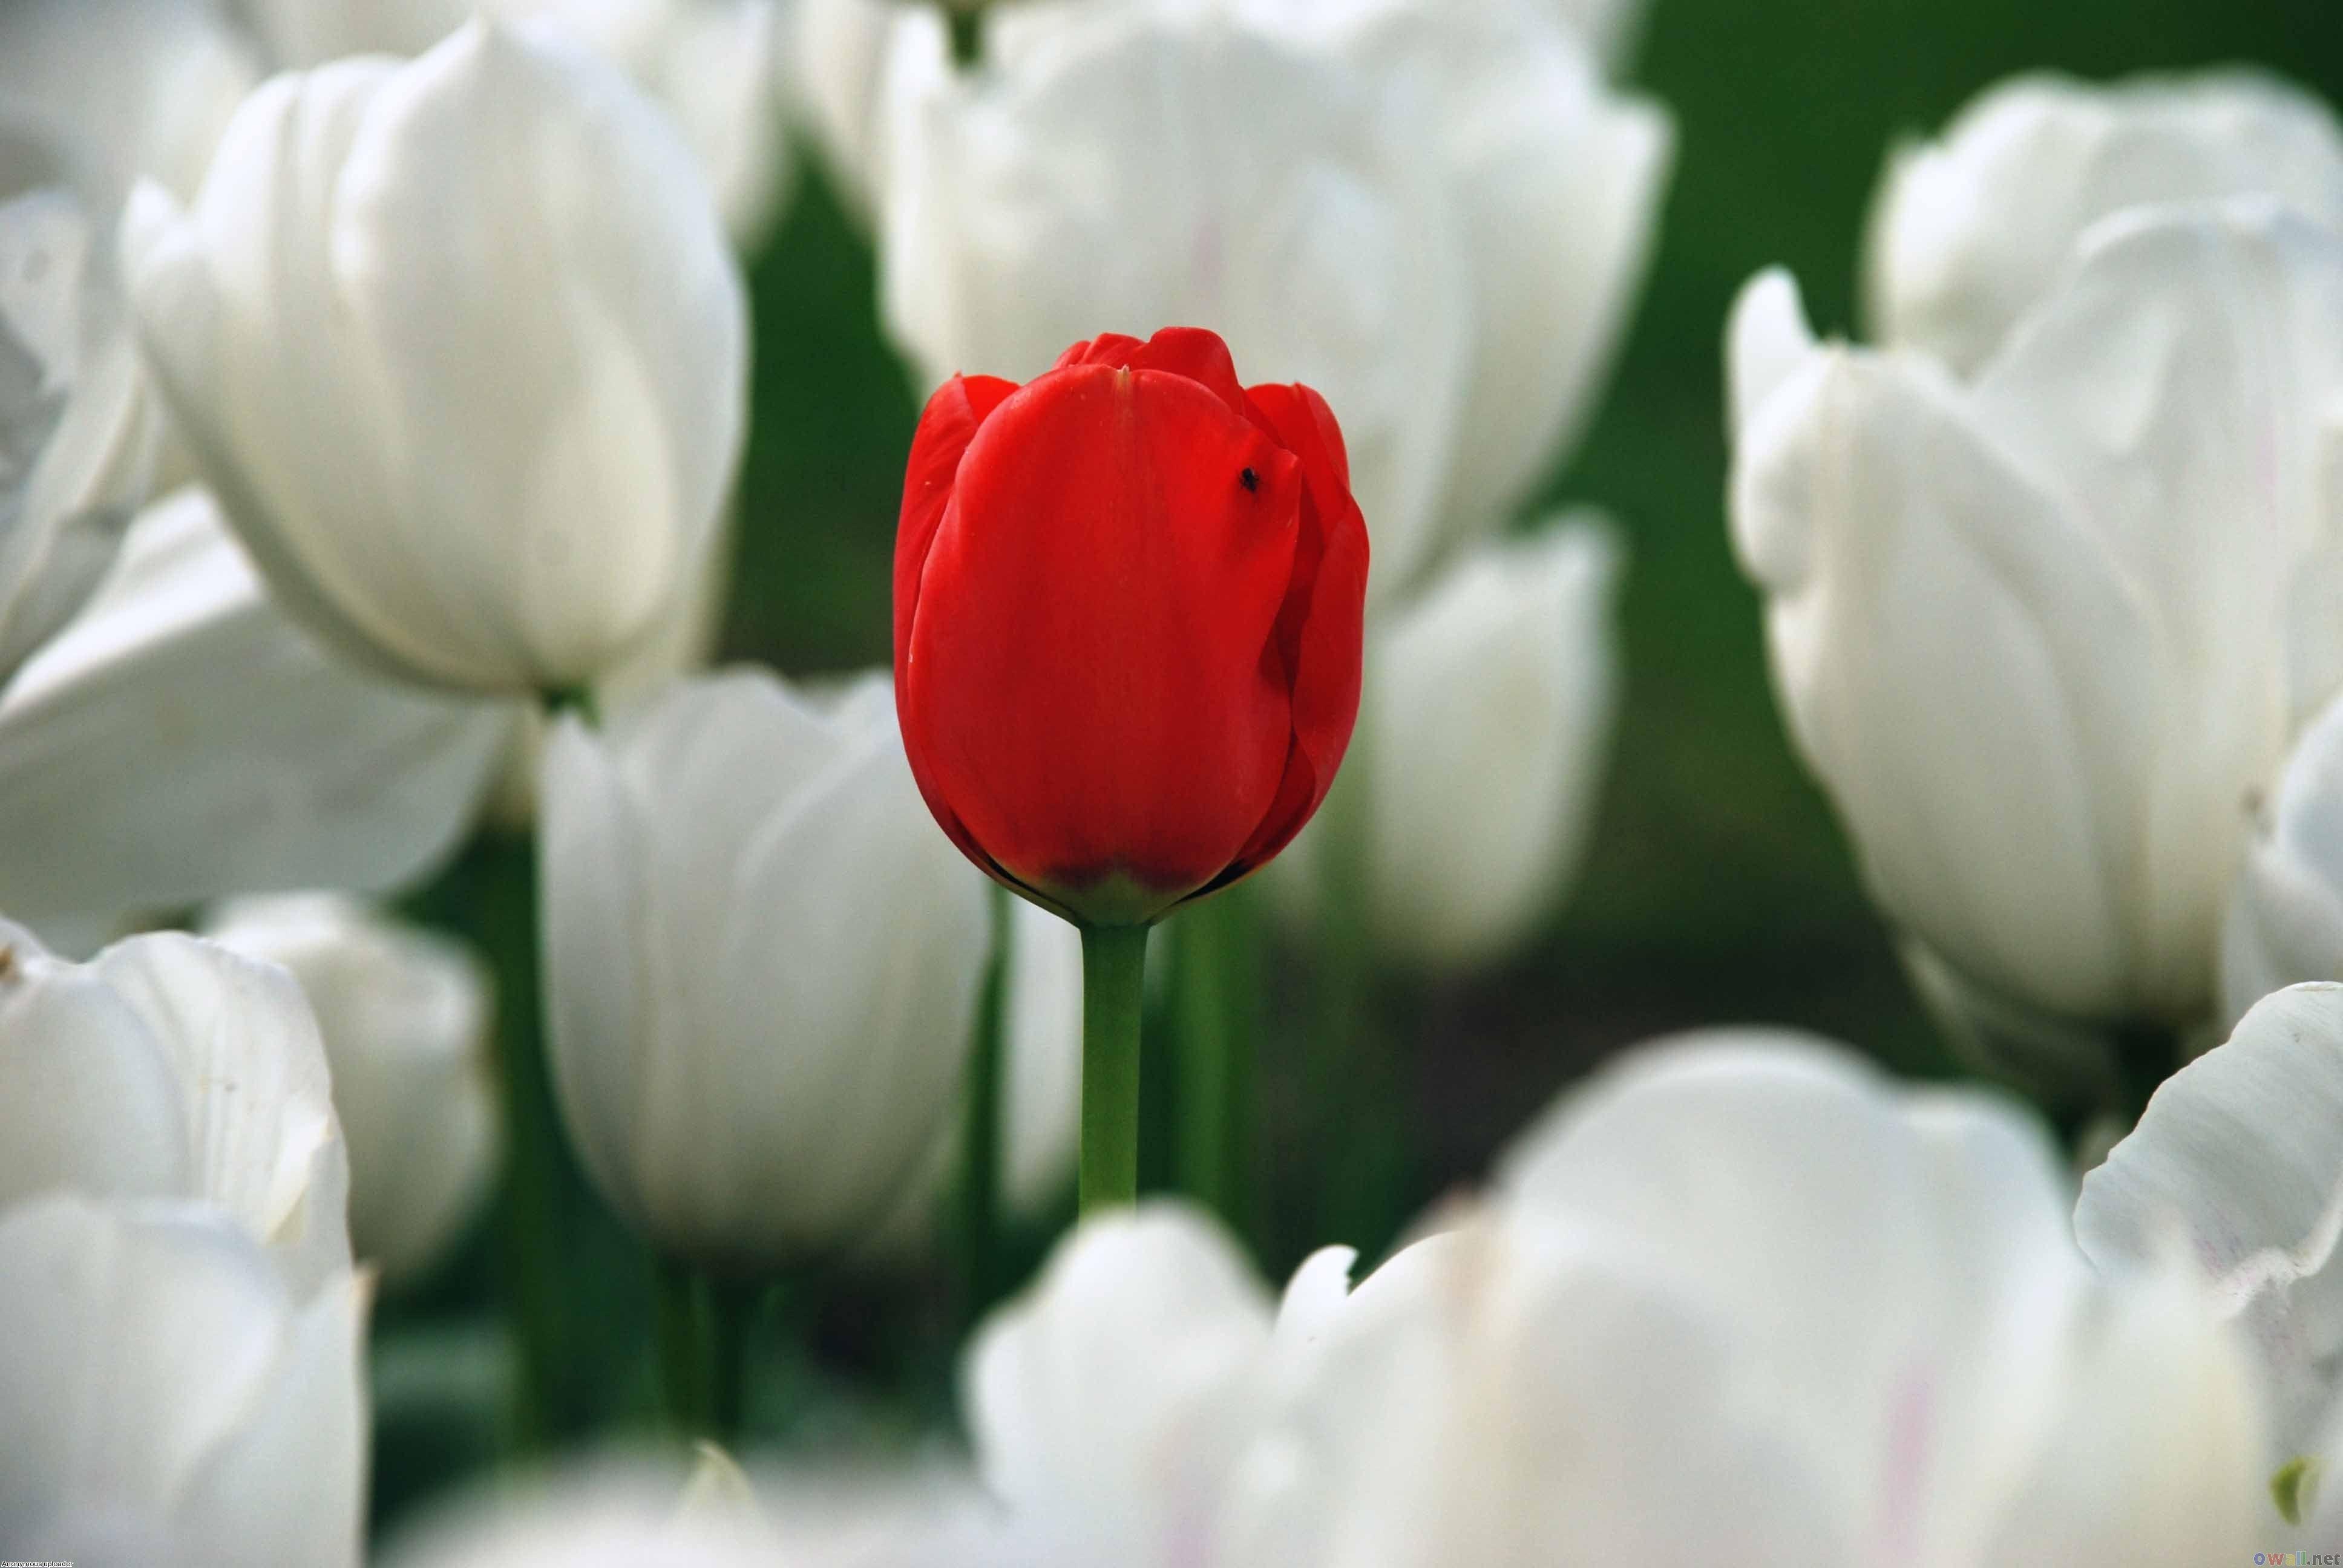 Background For > Red And White Tulips Wallpaper. Red